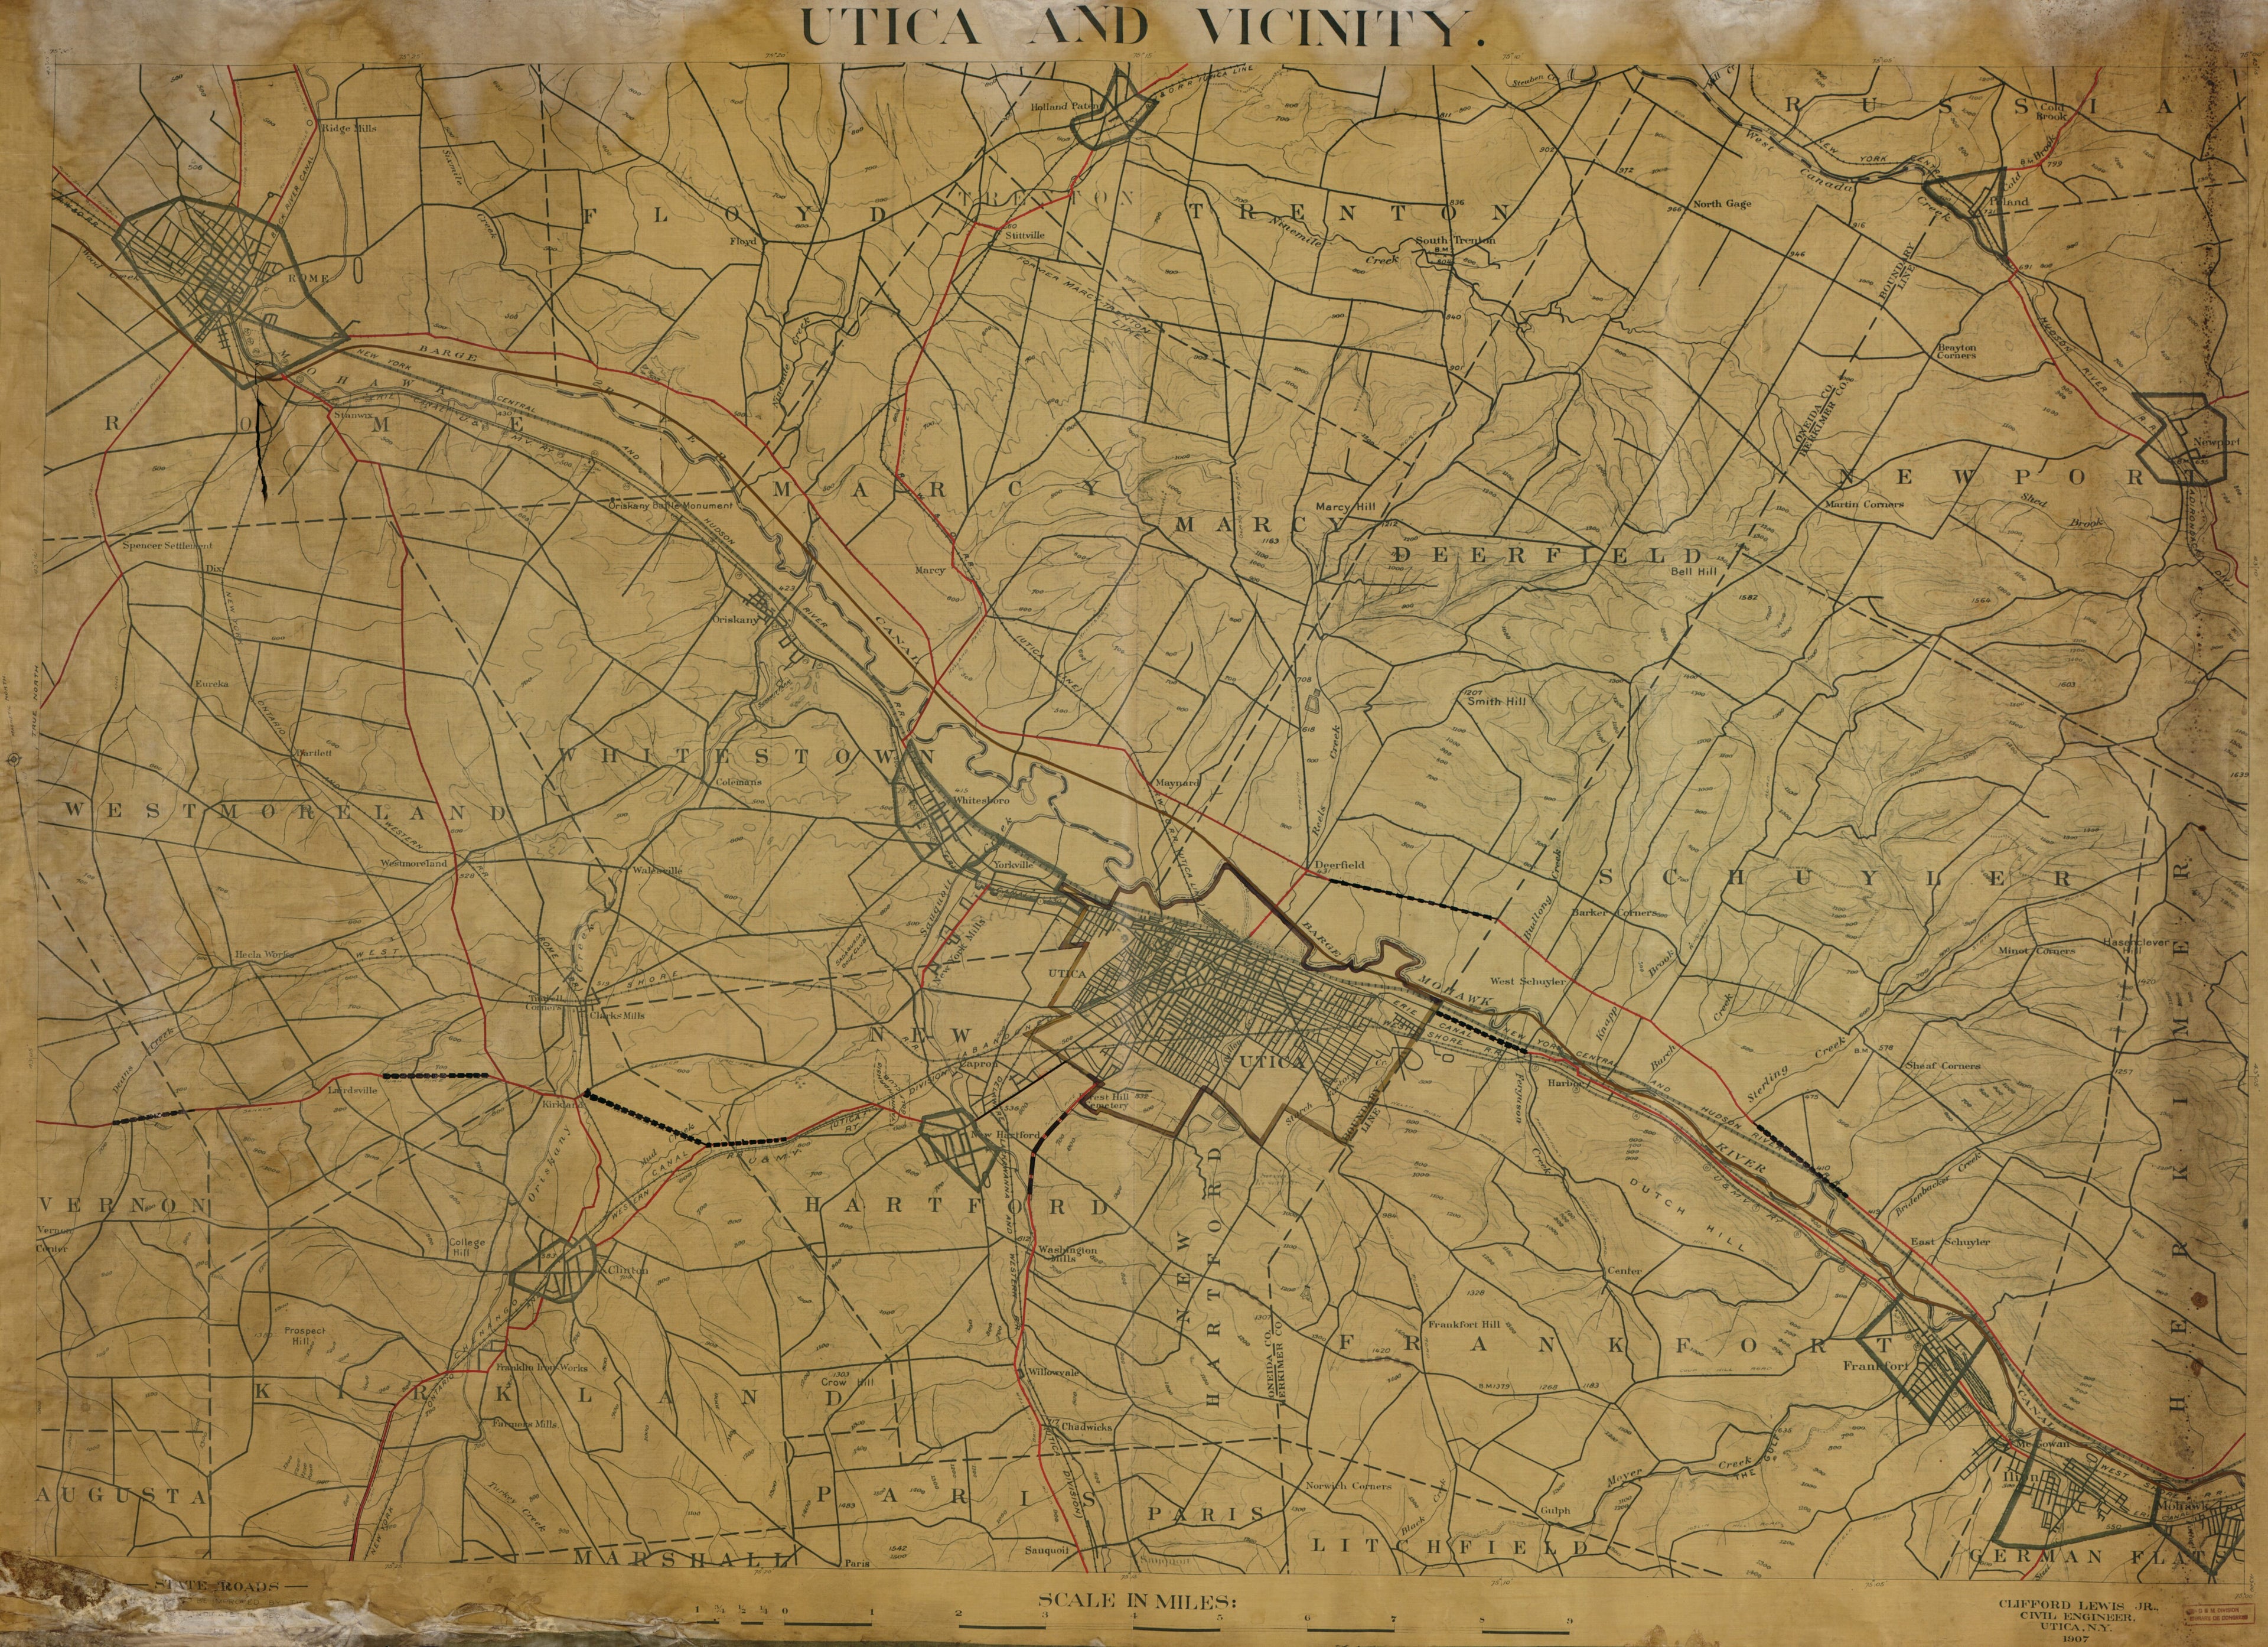 This old map of Utica and Vicinity from 1907 was created by Clifford Lewis in 1907